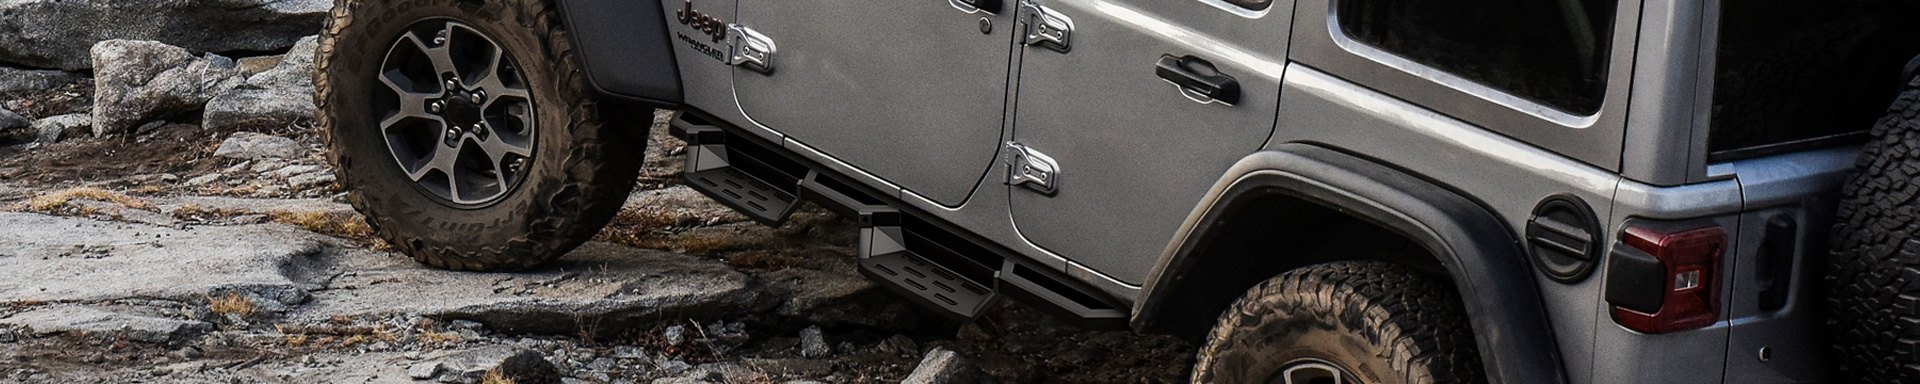 Maximize Versatility Of Your Rig With New Rectangular Nerf Bars by APG